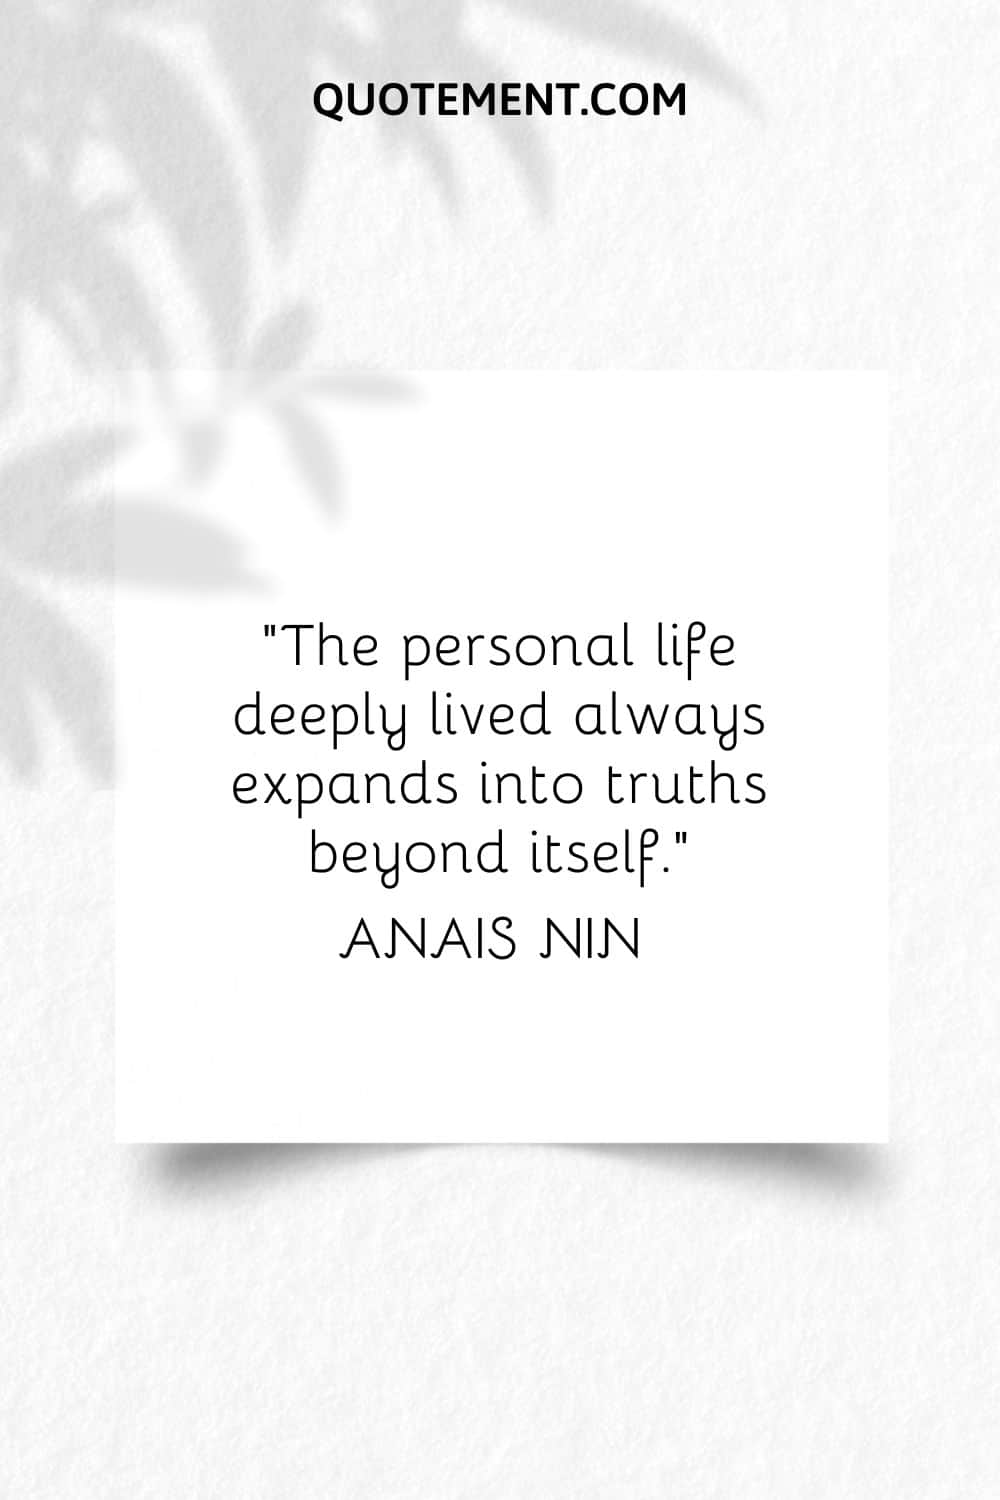 “The personal life deeply lived always expands into truths beyond itself.” — Anais Nin